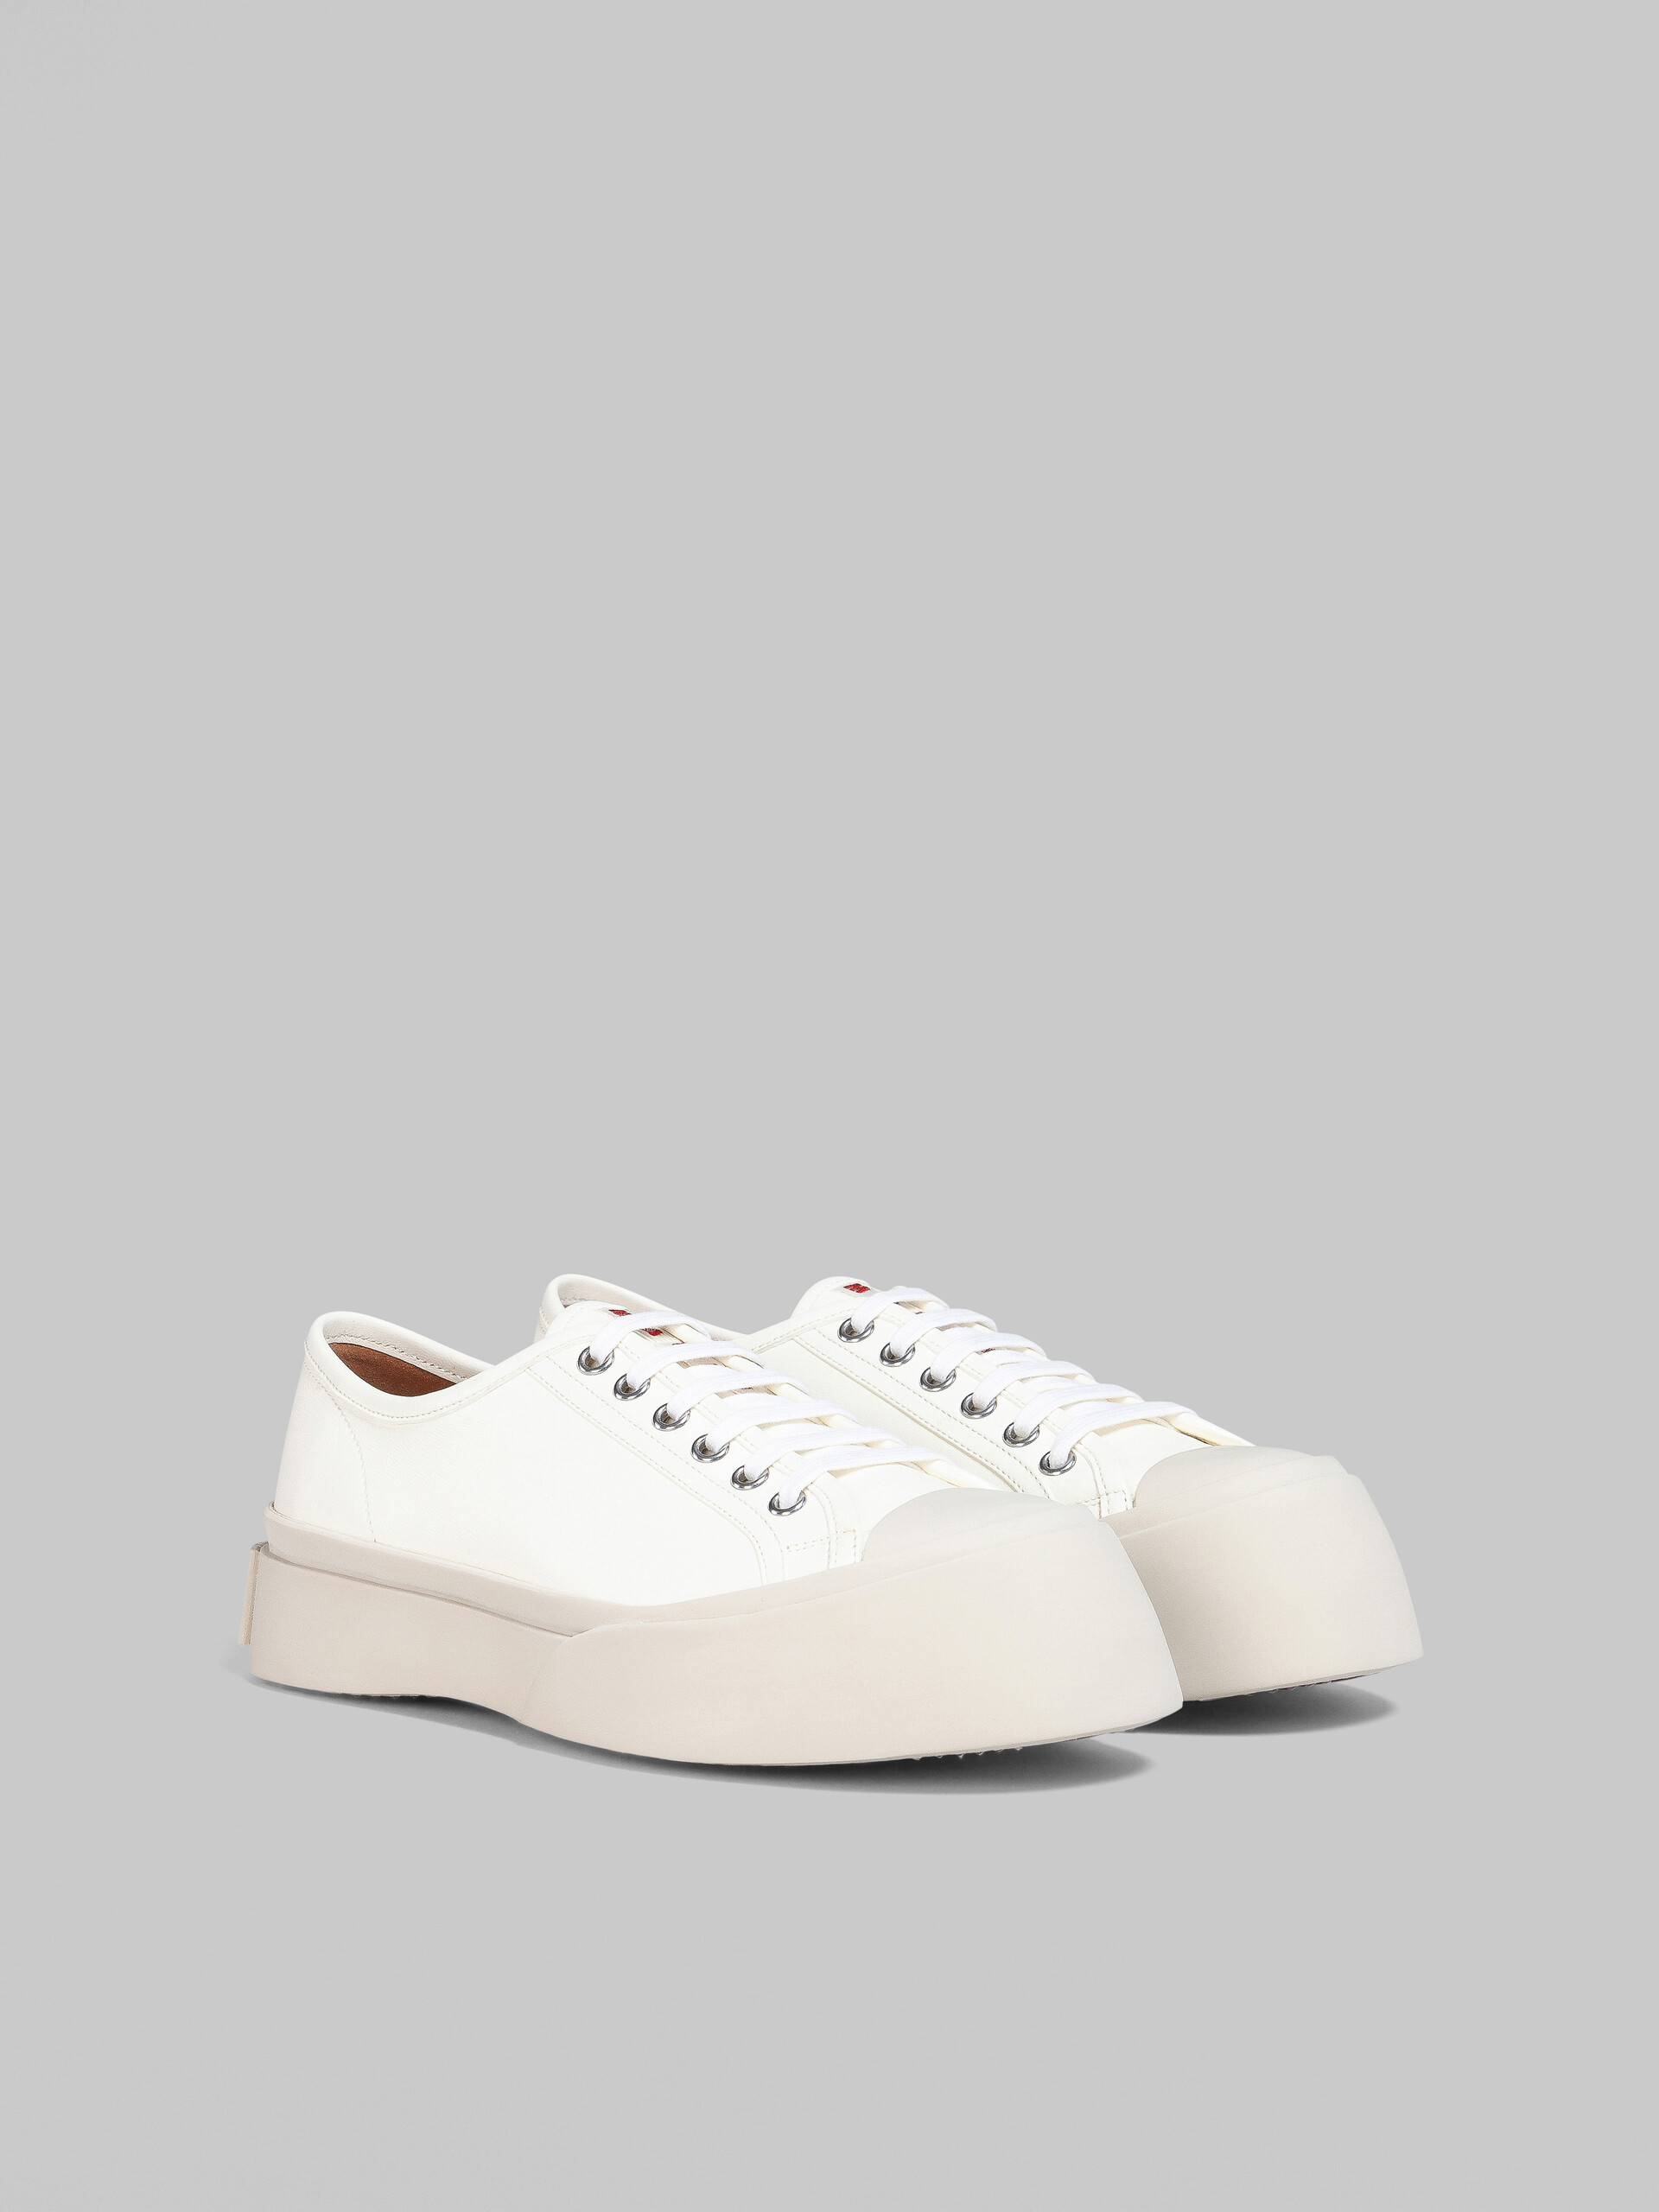 White leather Pablo lace-up sneaker - Sneakers - Image 2